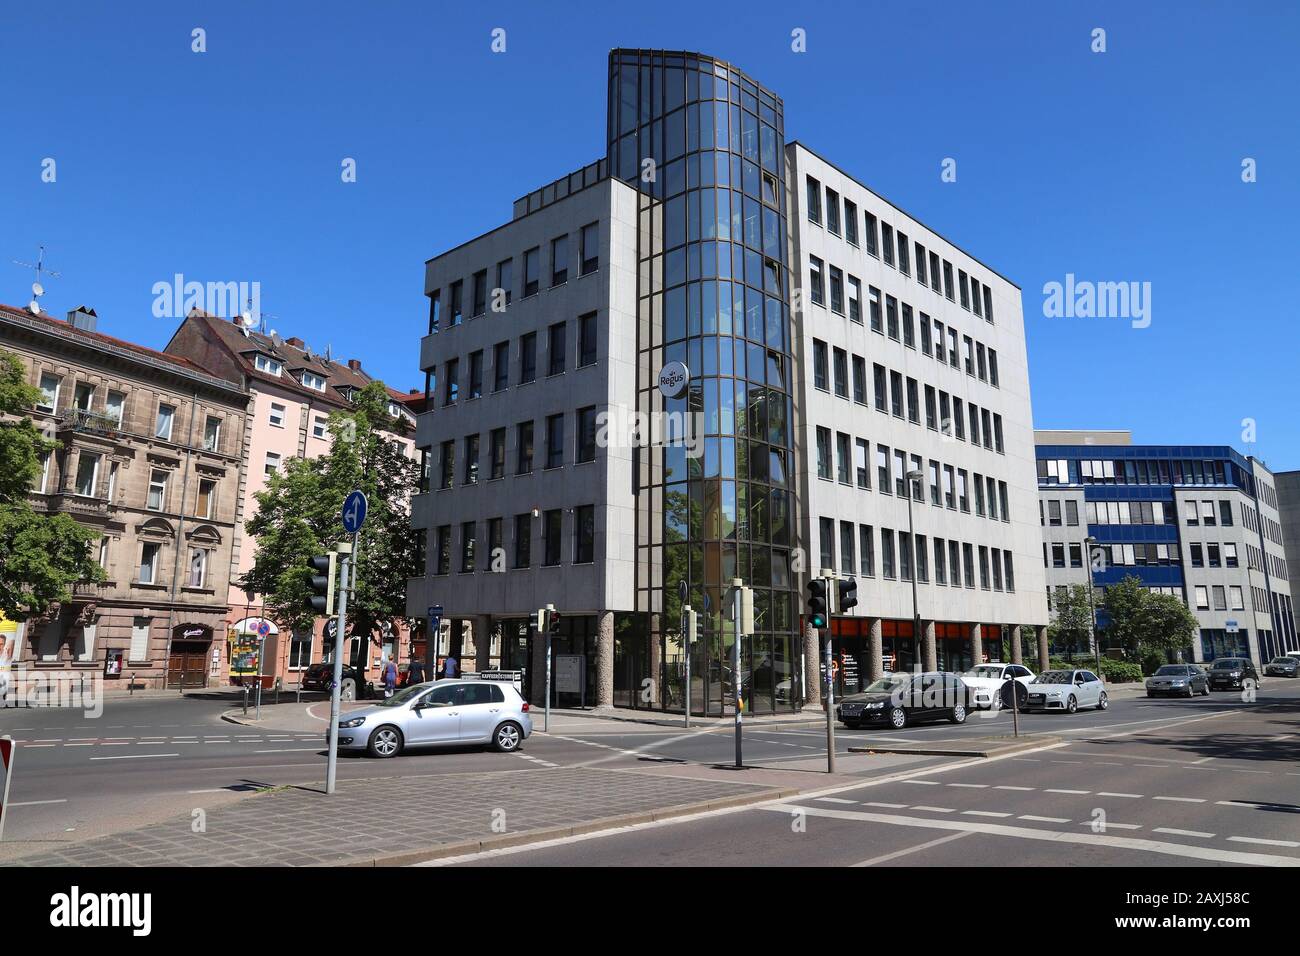 NUREMBERG, GERMANY - MAY 6, 2018: Regus office building in Nuremberg, Germany. Regus is a global company specializing in serviced offices, virtual off Stock Photo